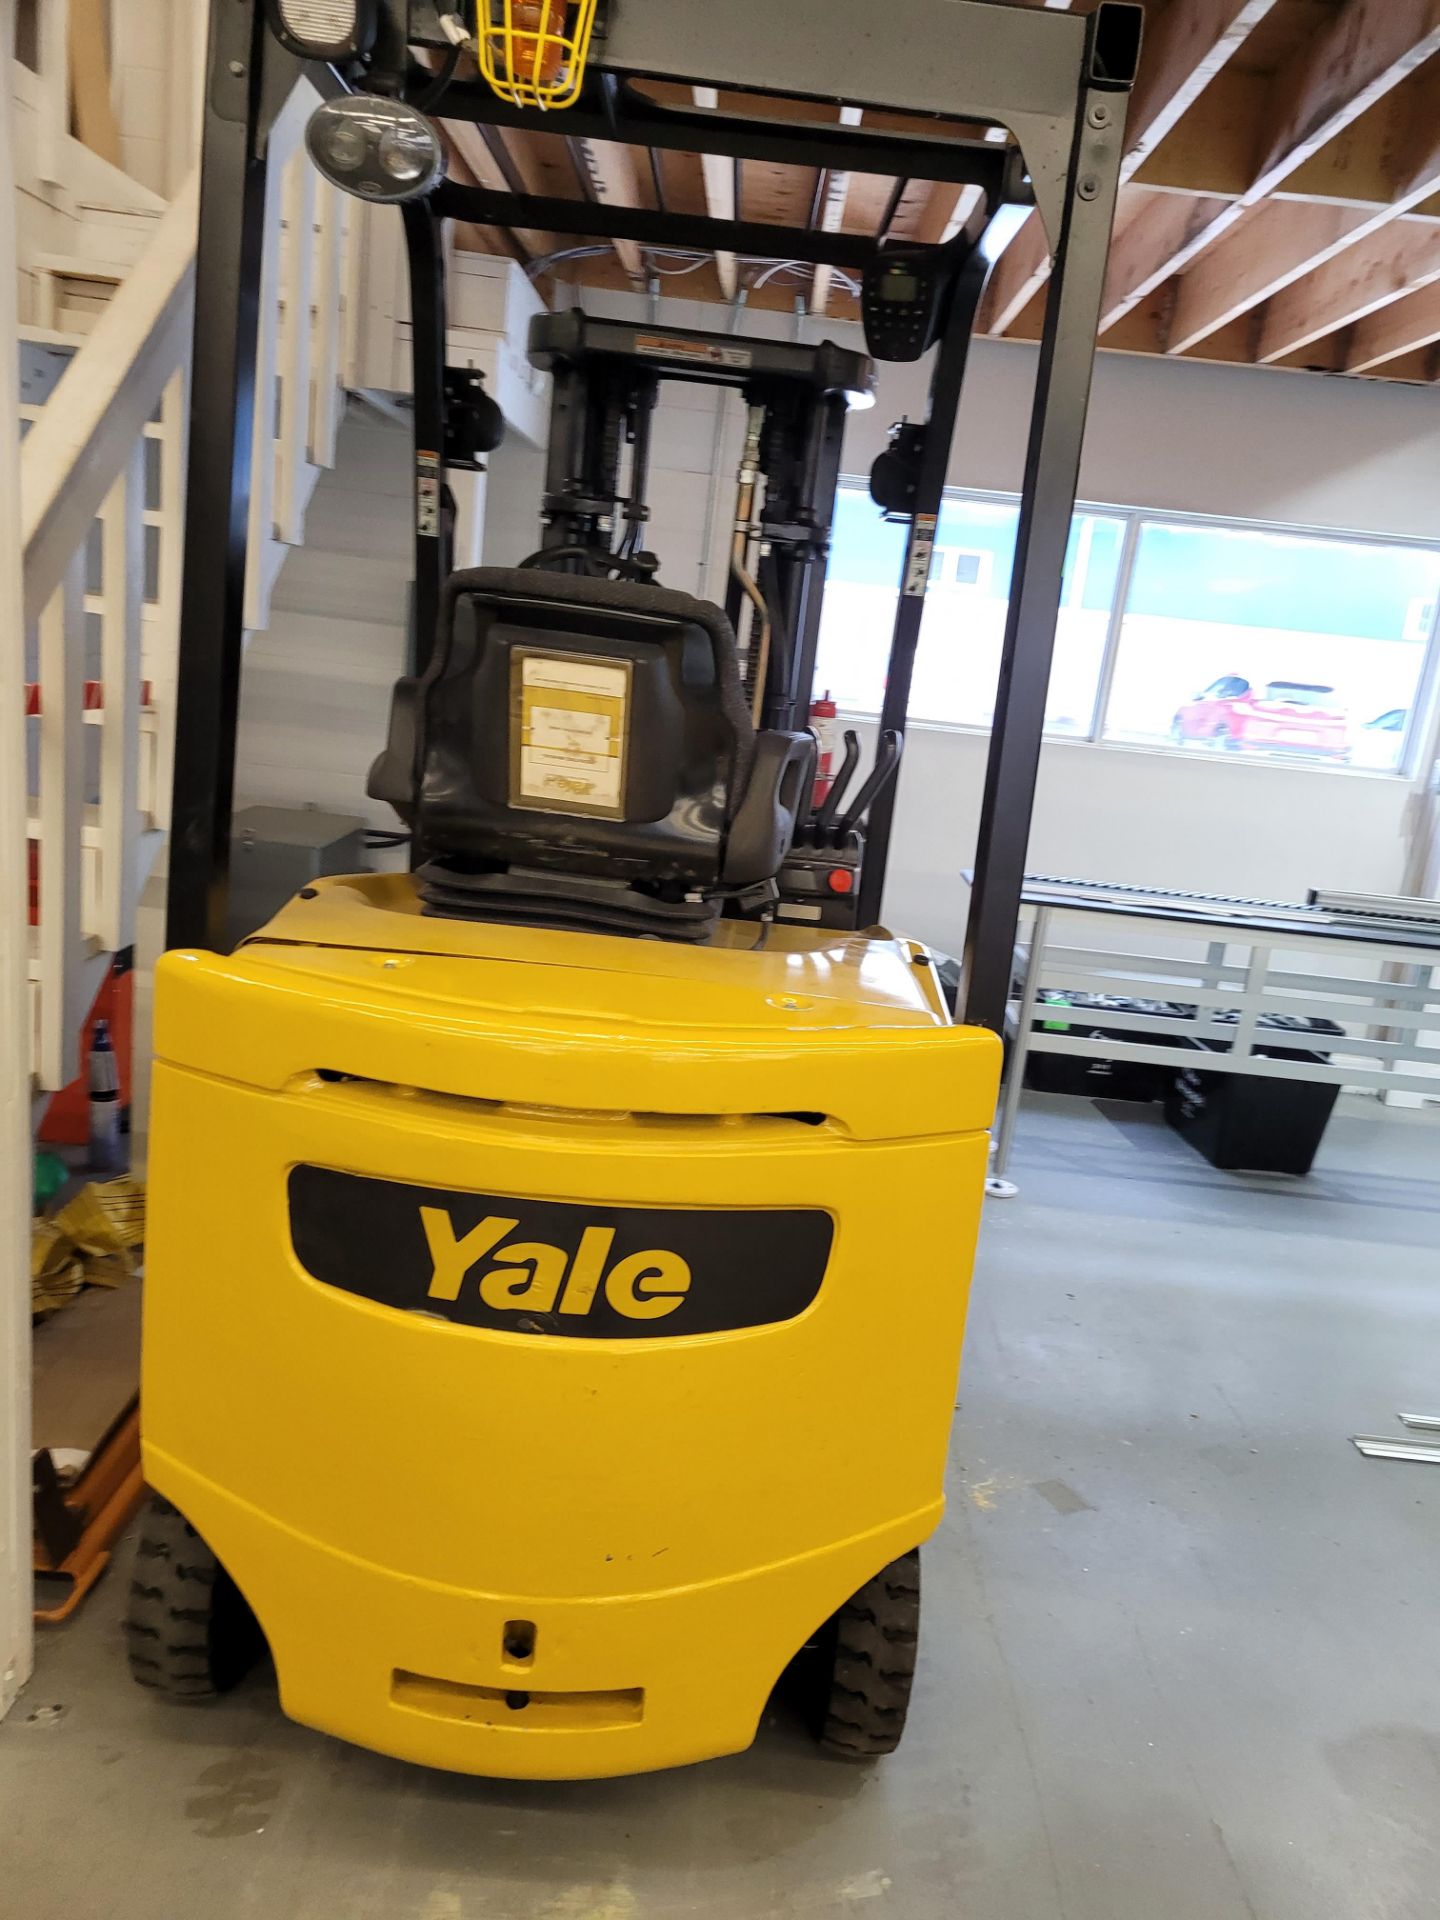 YALE Forklift mod. ERCO050VGN48TE85, 4200lbs cap., 48V, 17' H, 4900hrs, ser. A968N04749 with battery - Image 4 of 30